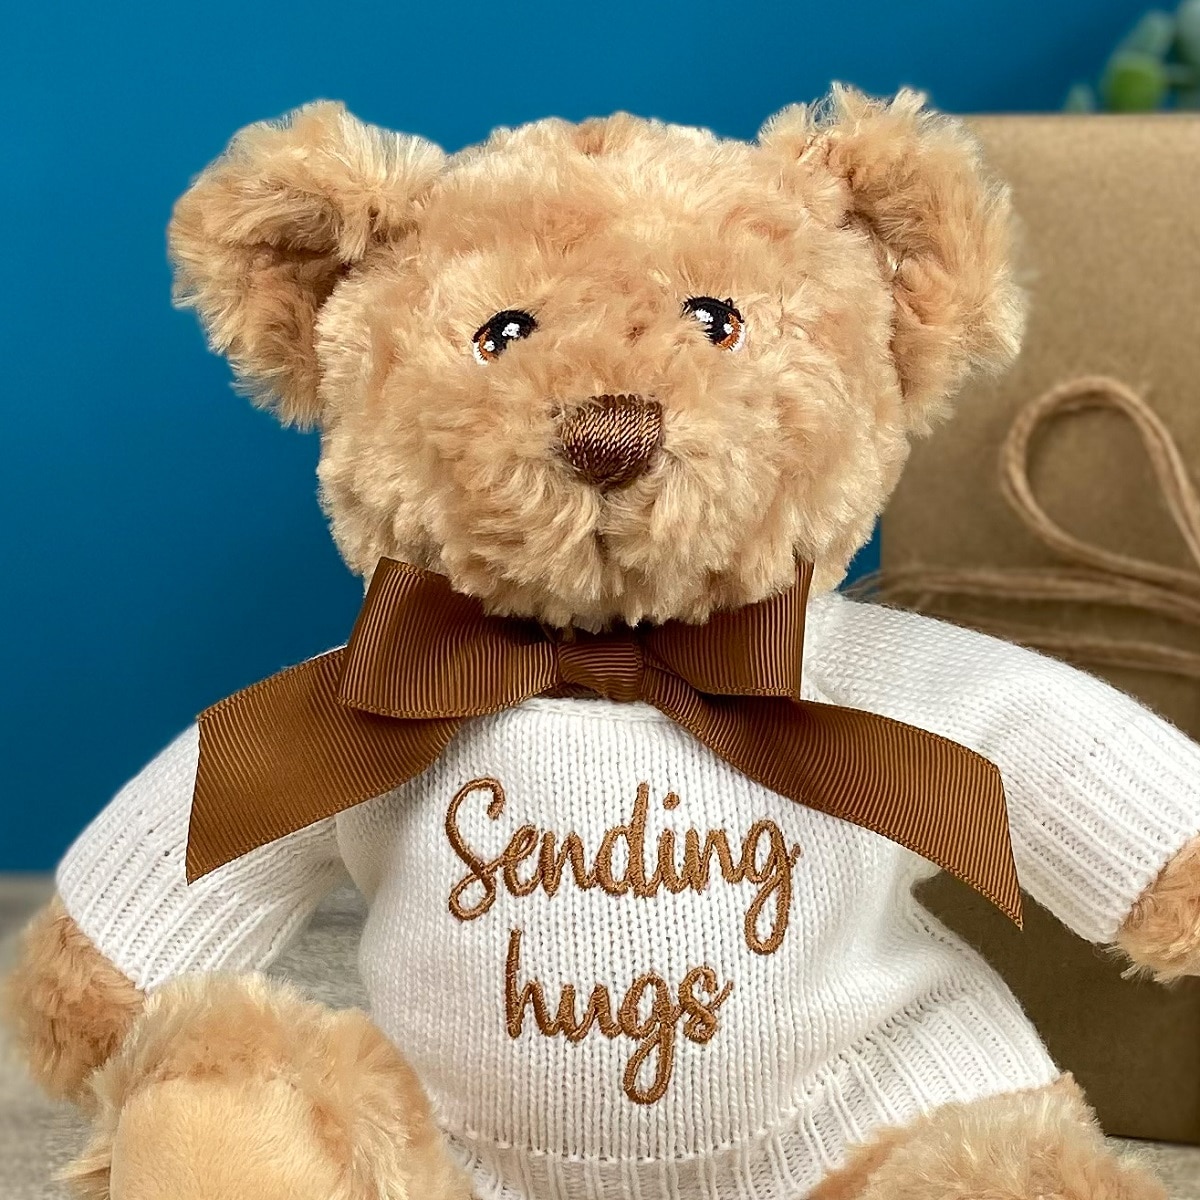 Keeleco recycled small Dougie caring bear soft toy with 'Sending Hugs' jumper